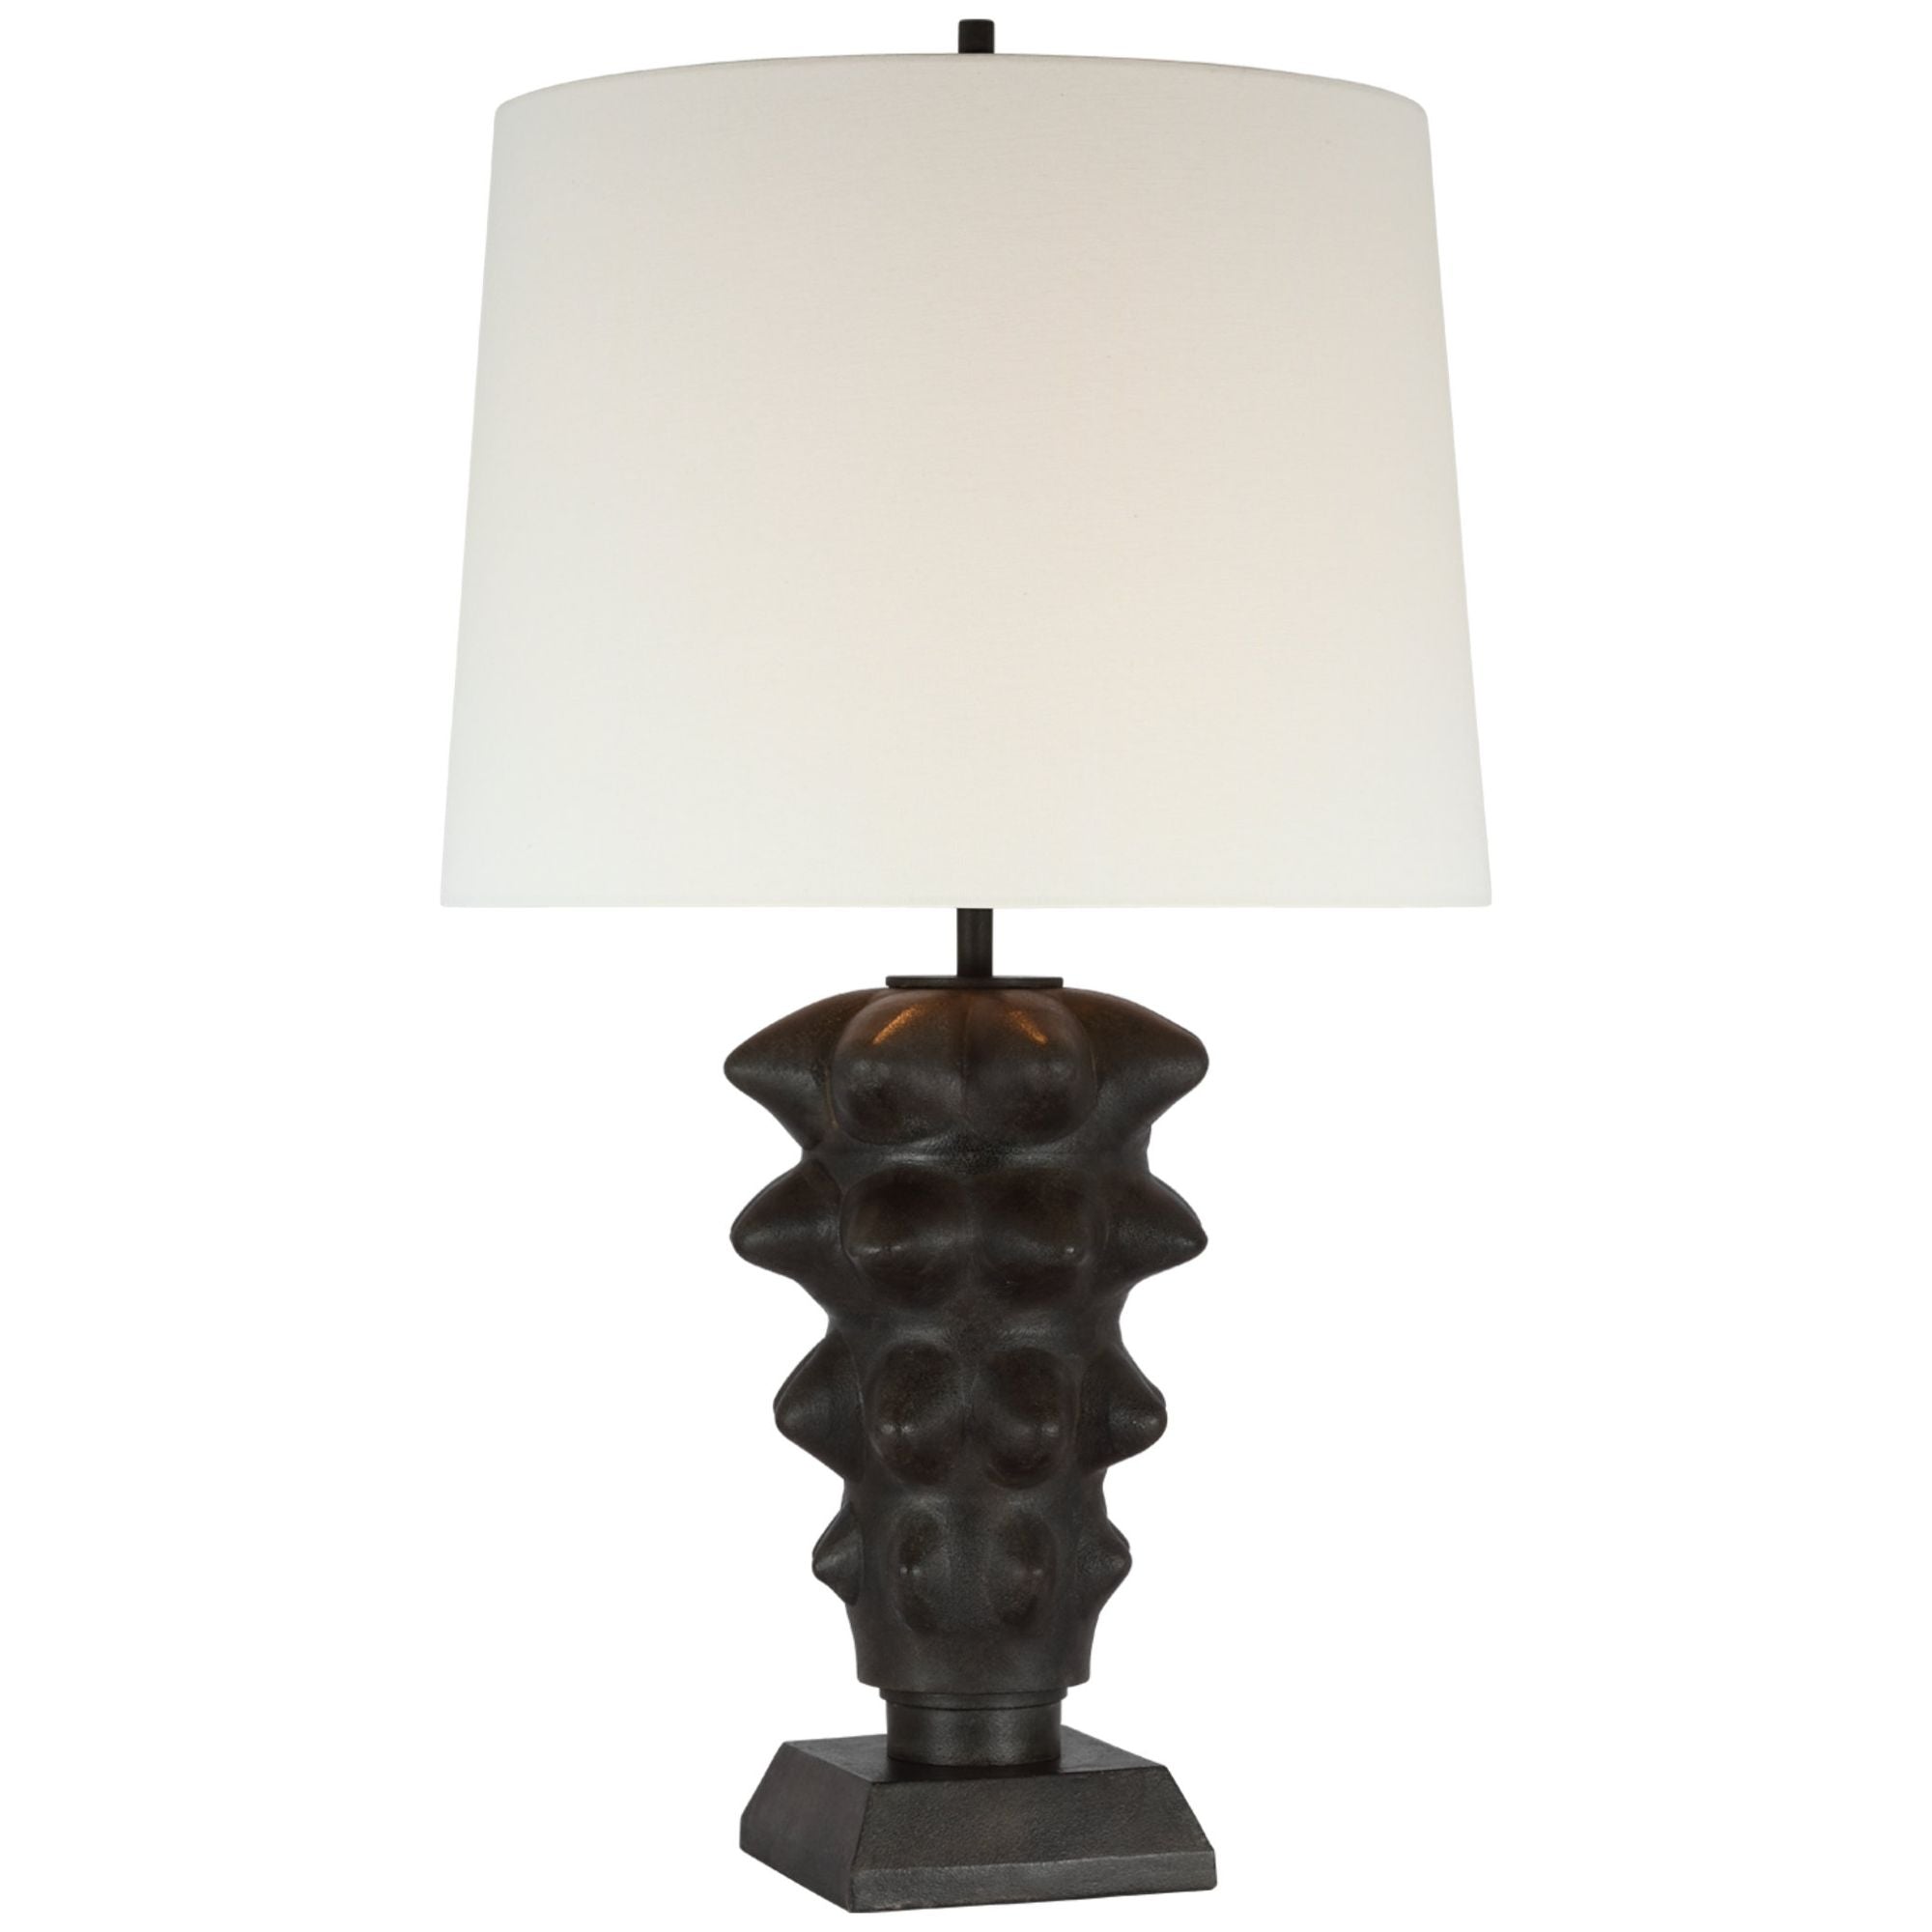 Thomas O'Brien Luxor Large Table Lamp in Garden Bronze with Linen Shade